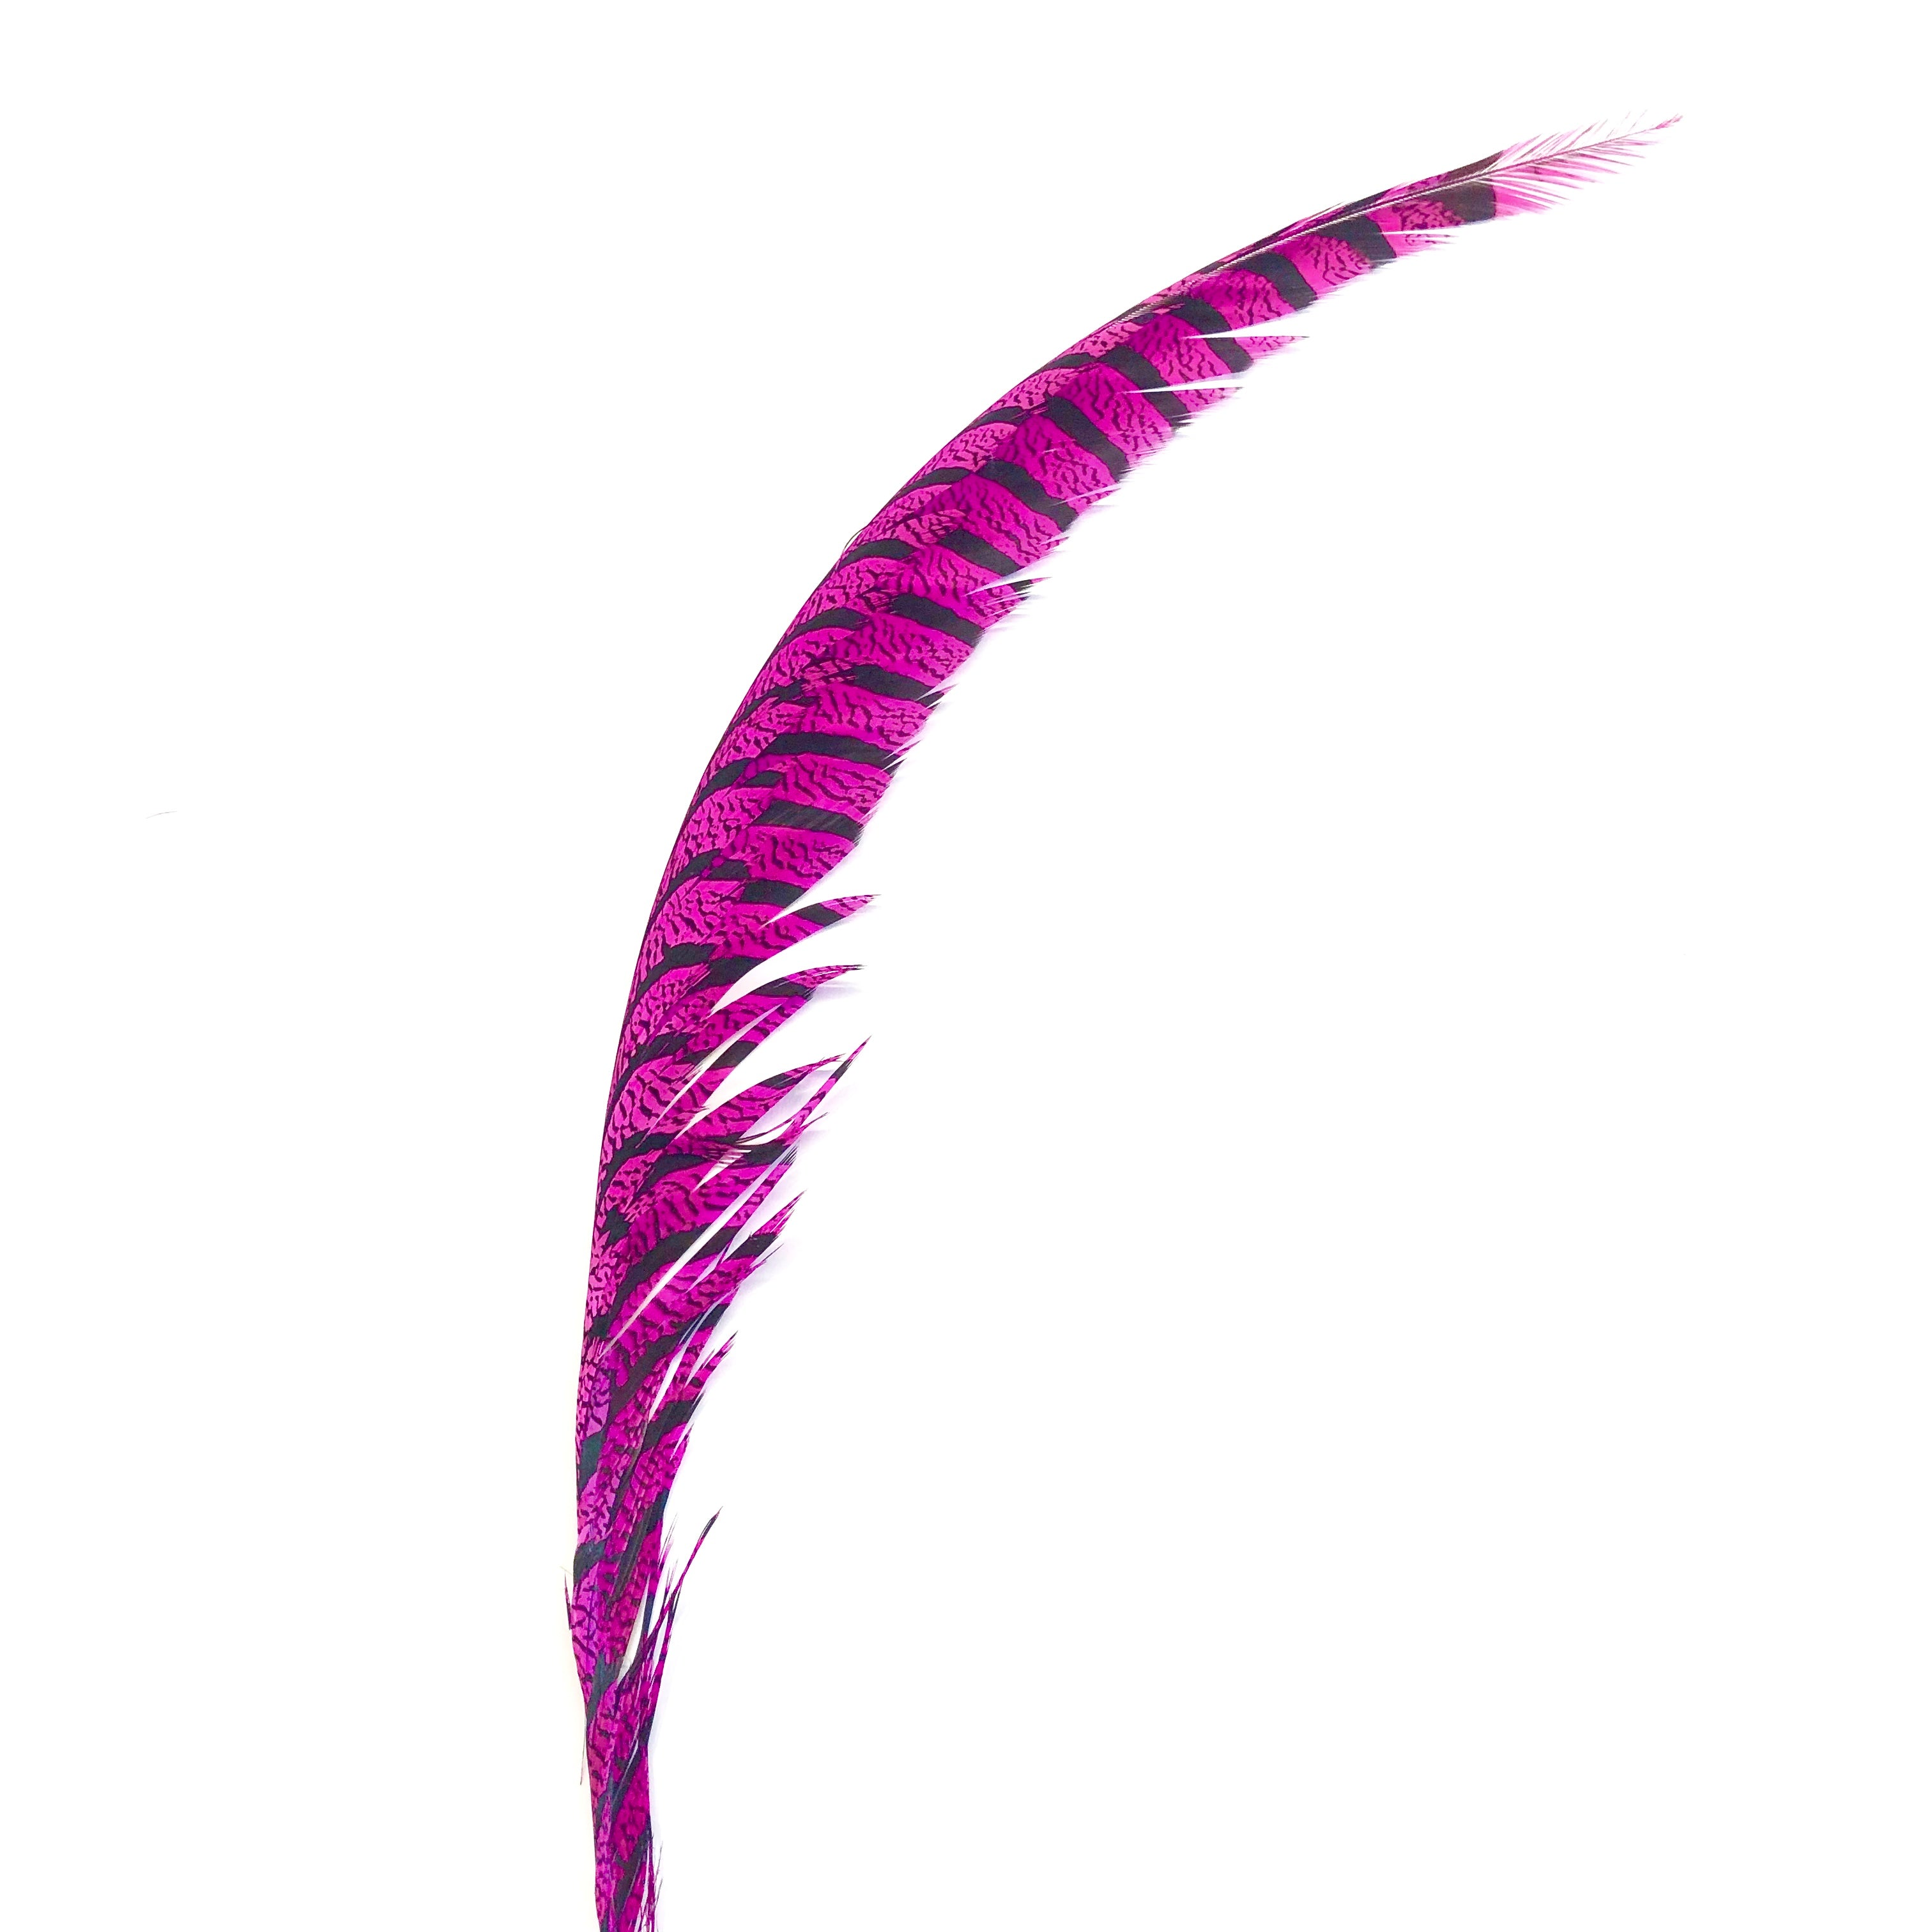 Lady Amherst Pheasant Centre Tail Feather - Cerise